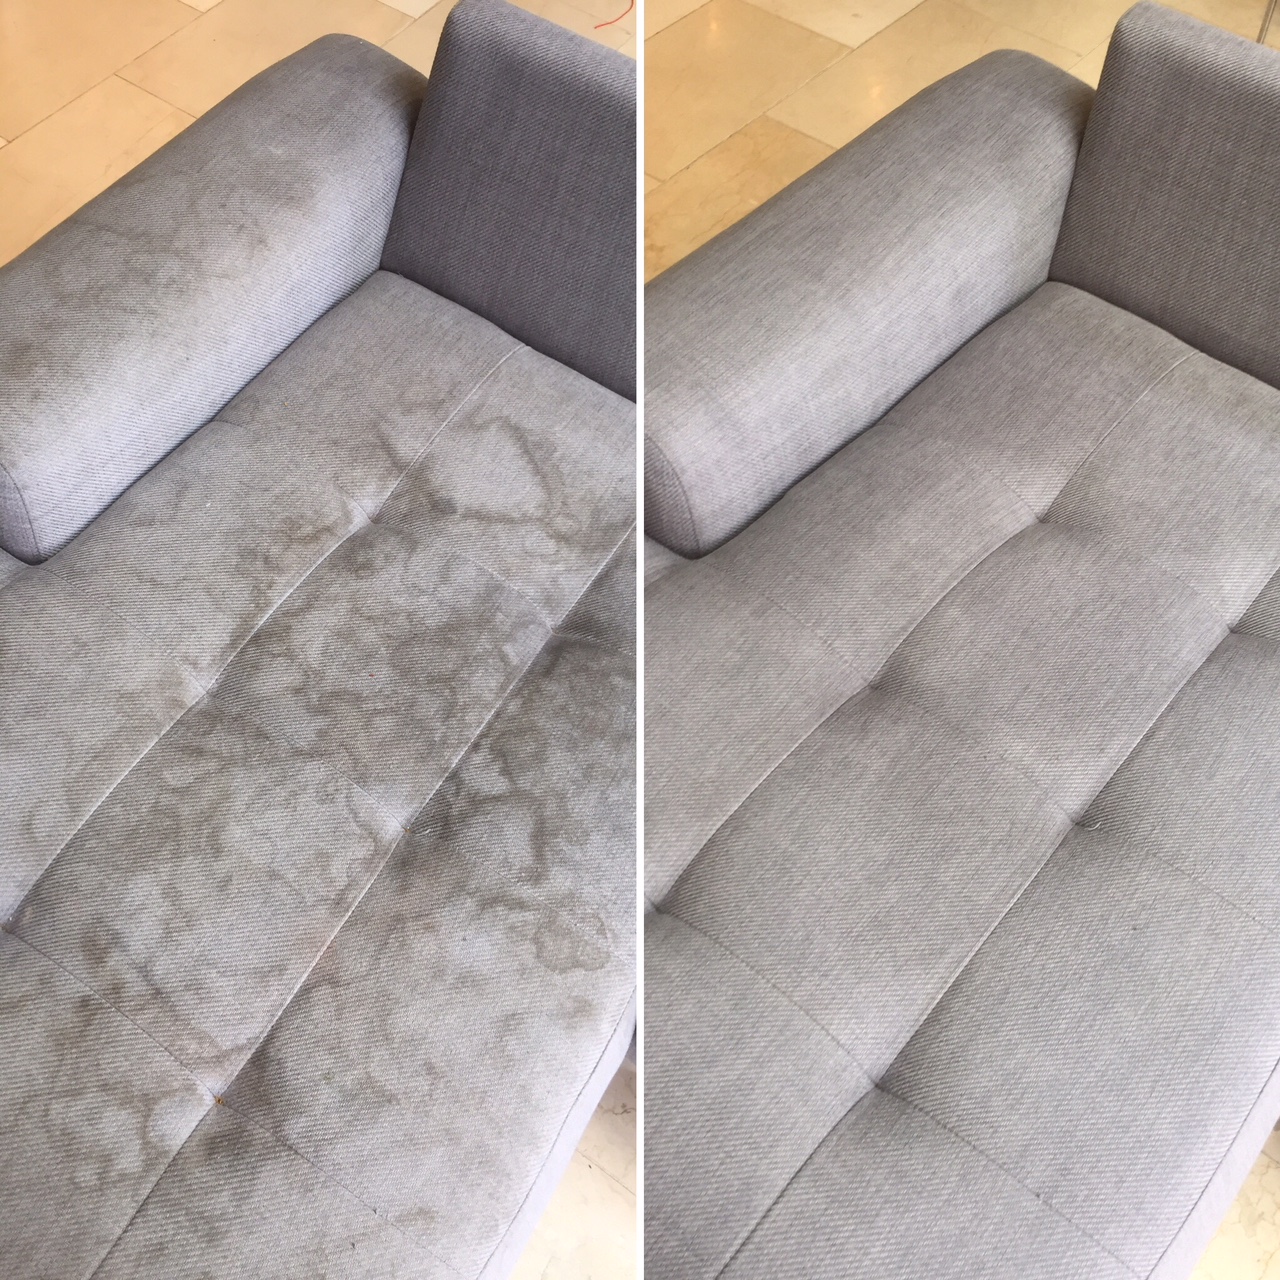 Before and After Upholstery Cleaning Services in Squamish, BC by Busy Boys